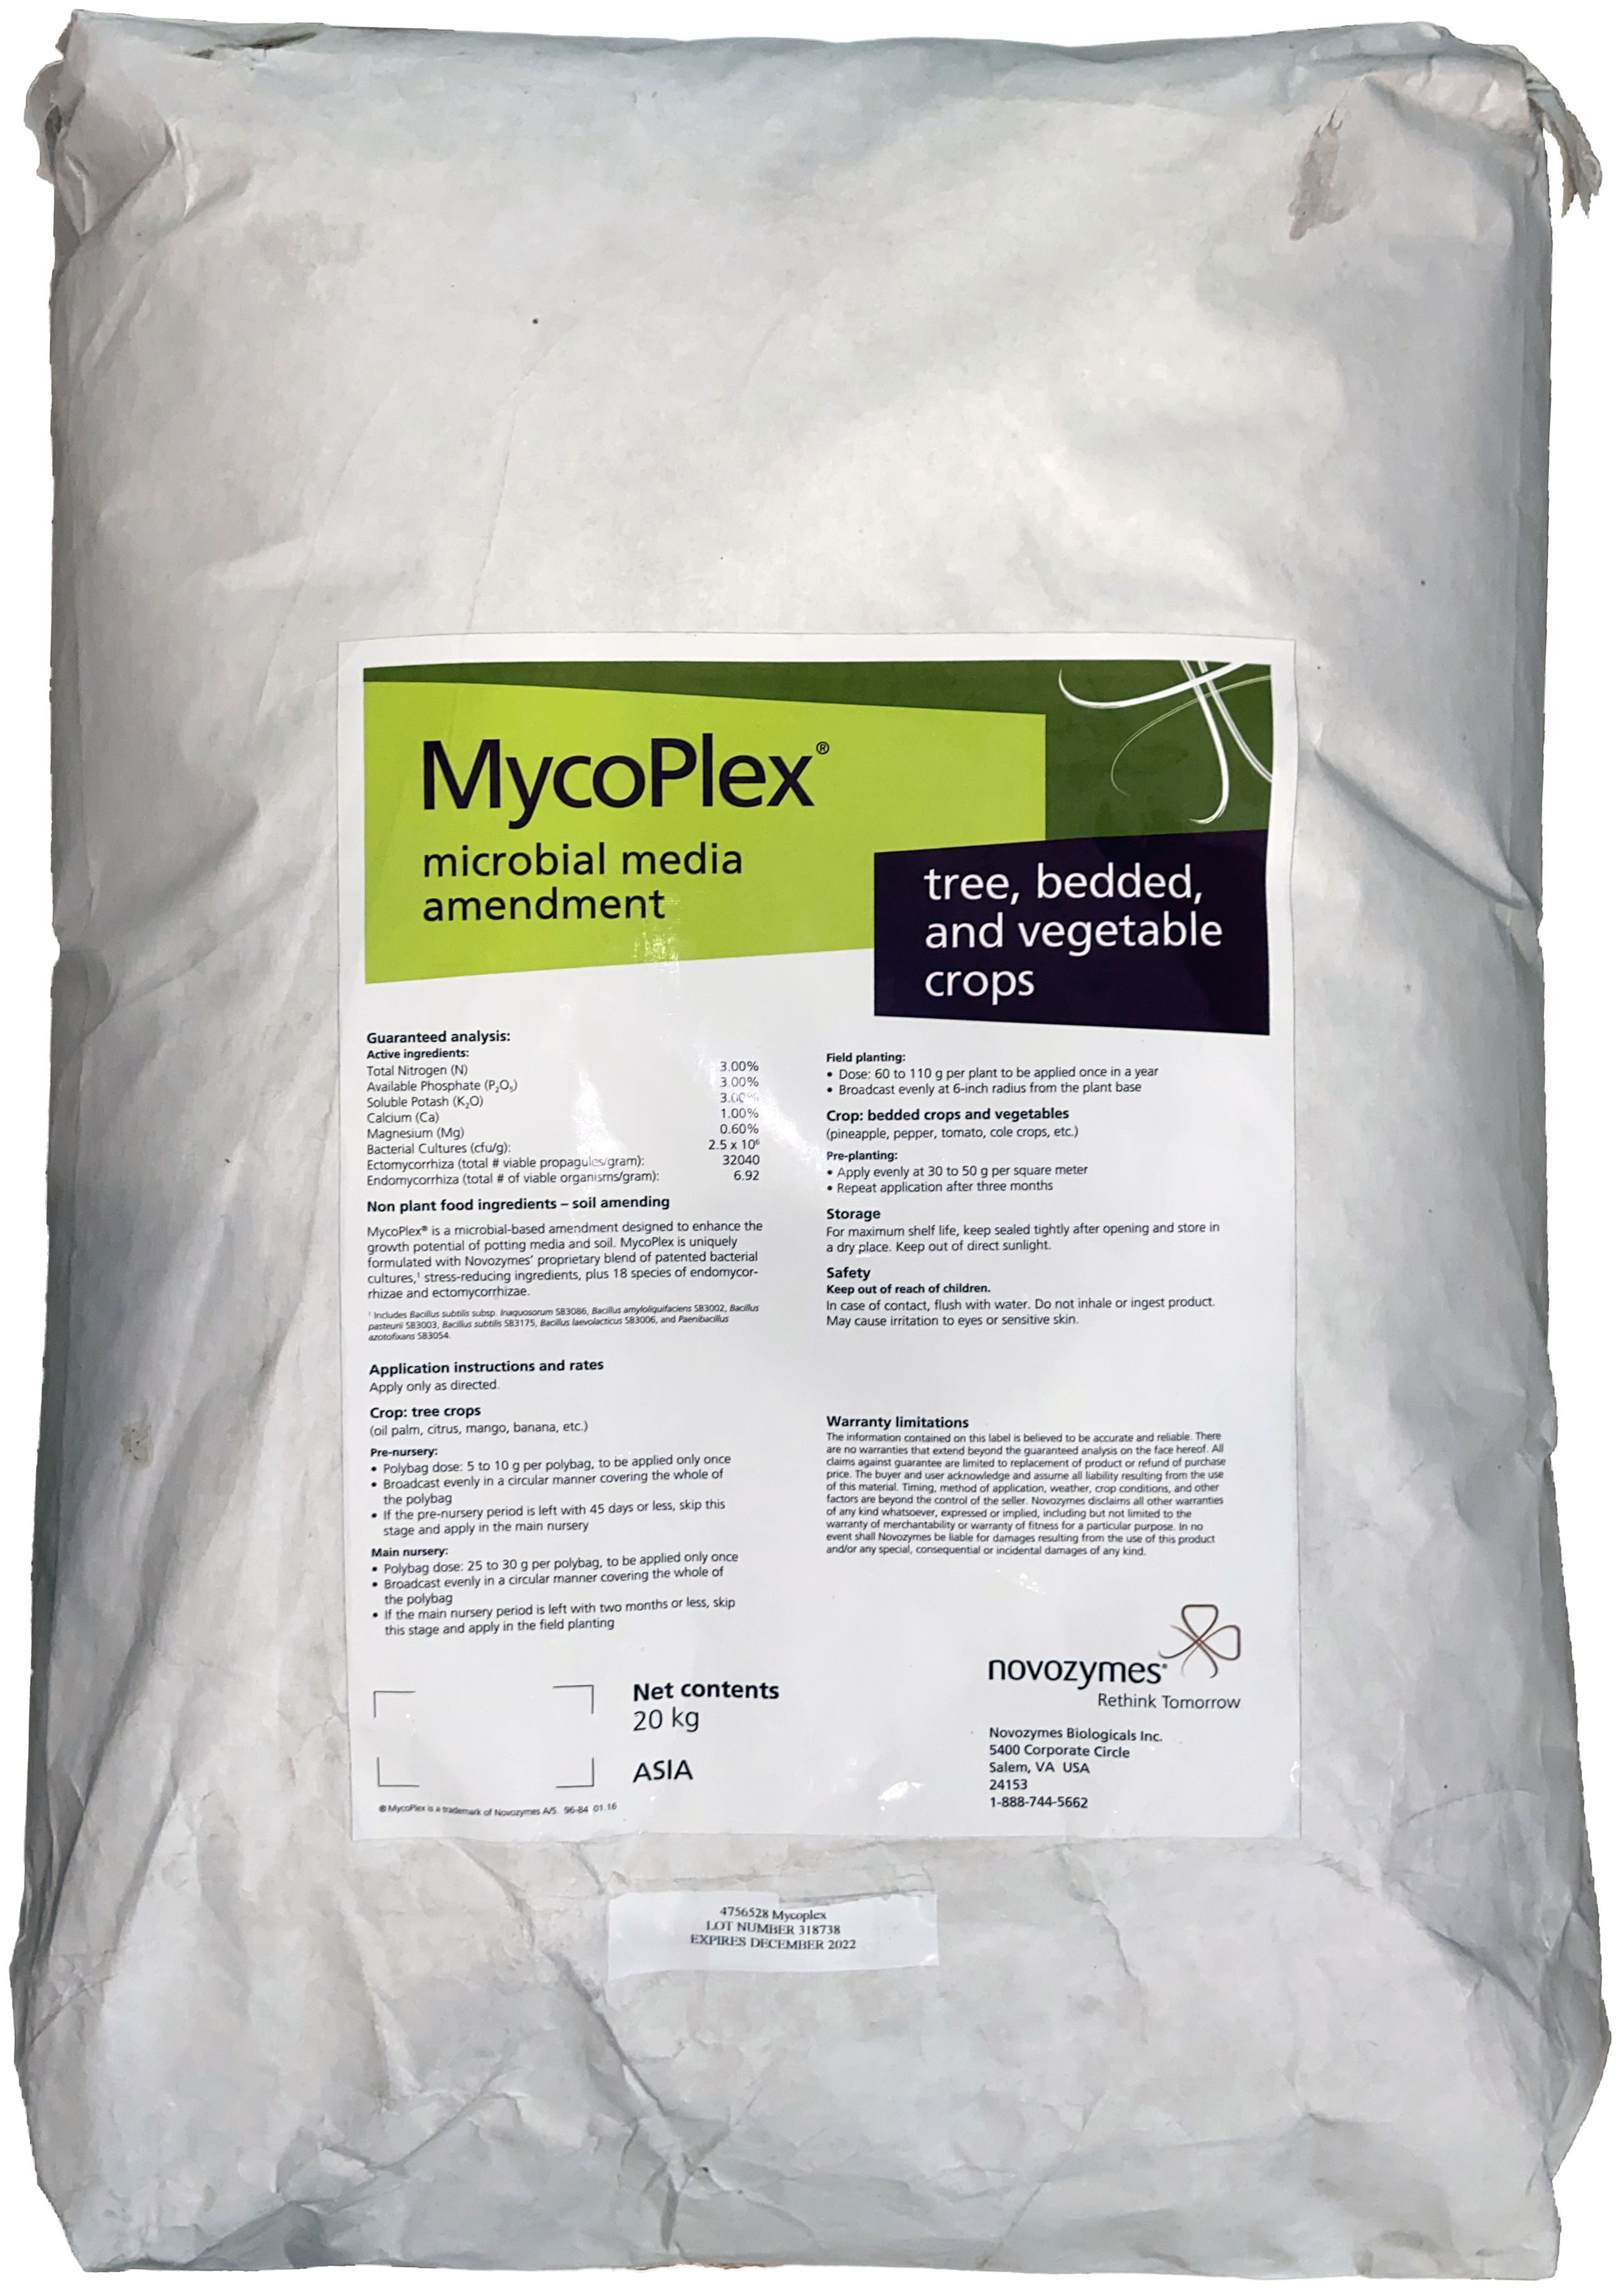 MycoPlex®, a biofertilizer specifically developed to enhance growth in oil palm